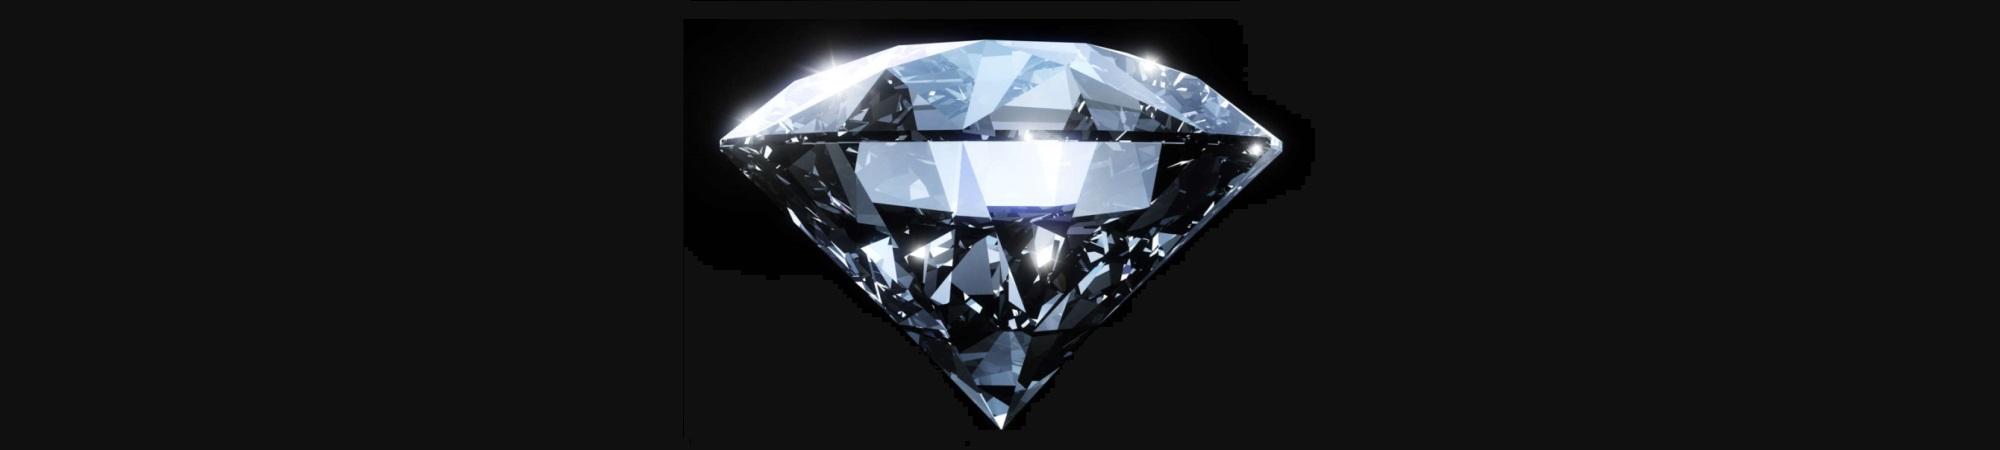 Depiction of large fist-sized perfect diamond on black-ground. 